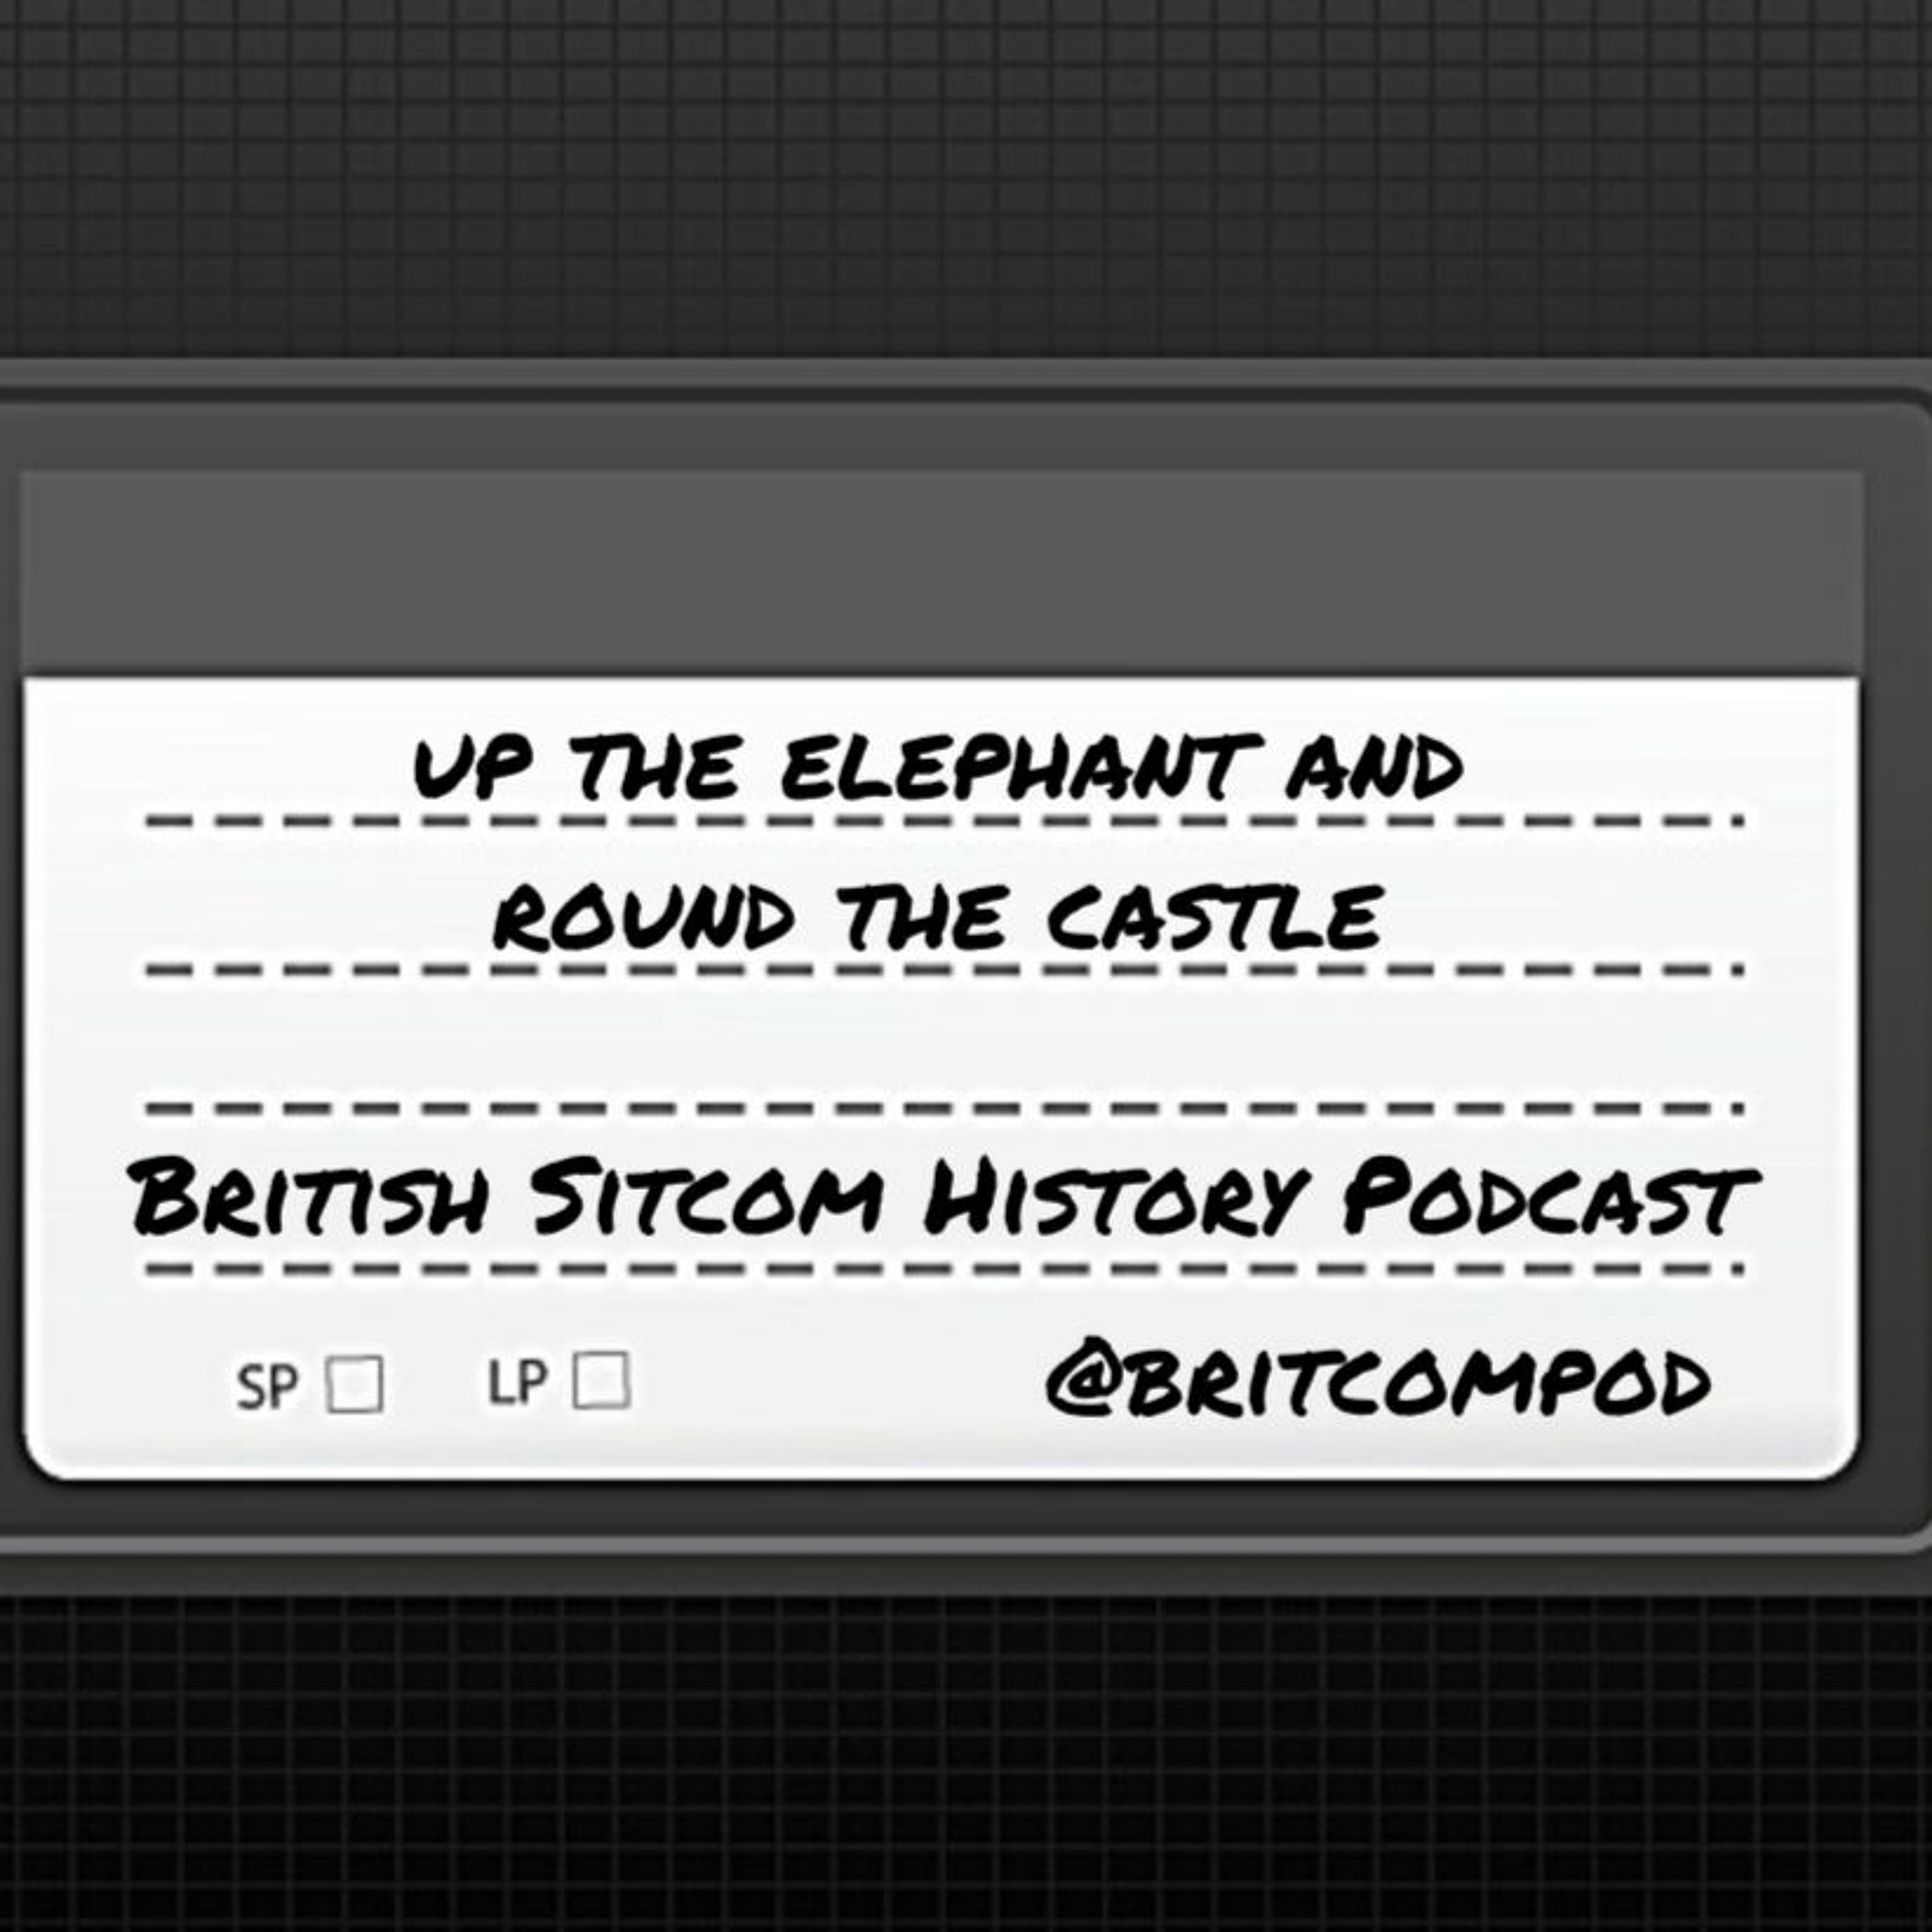 Up the Elephant and Round the Castle (Part 1)